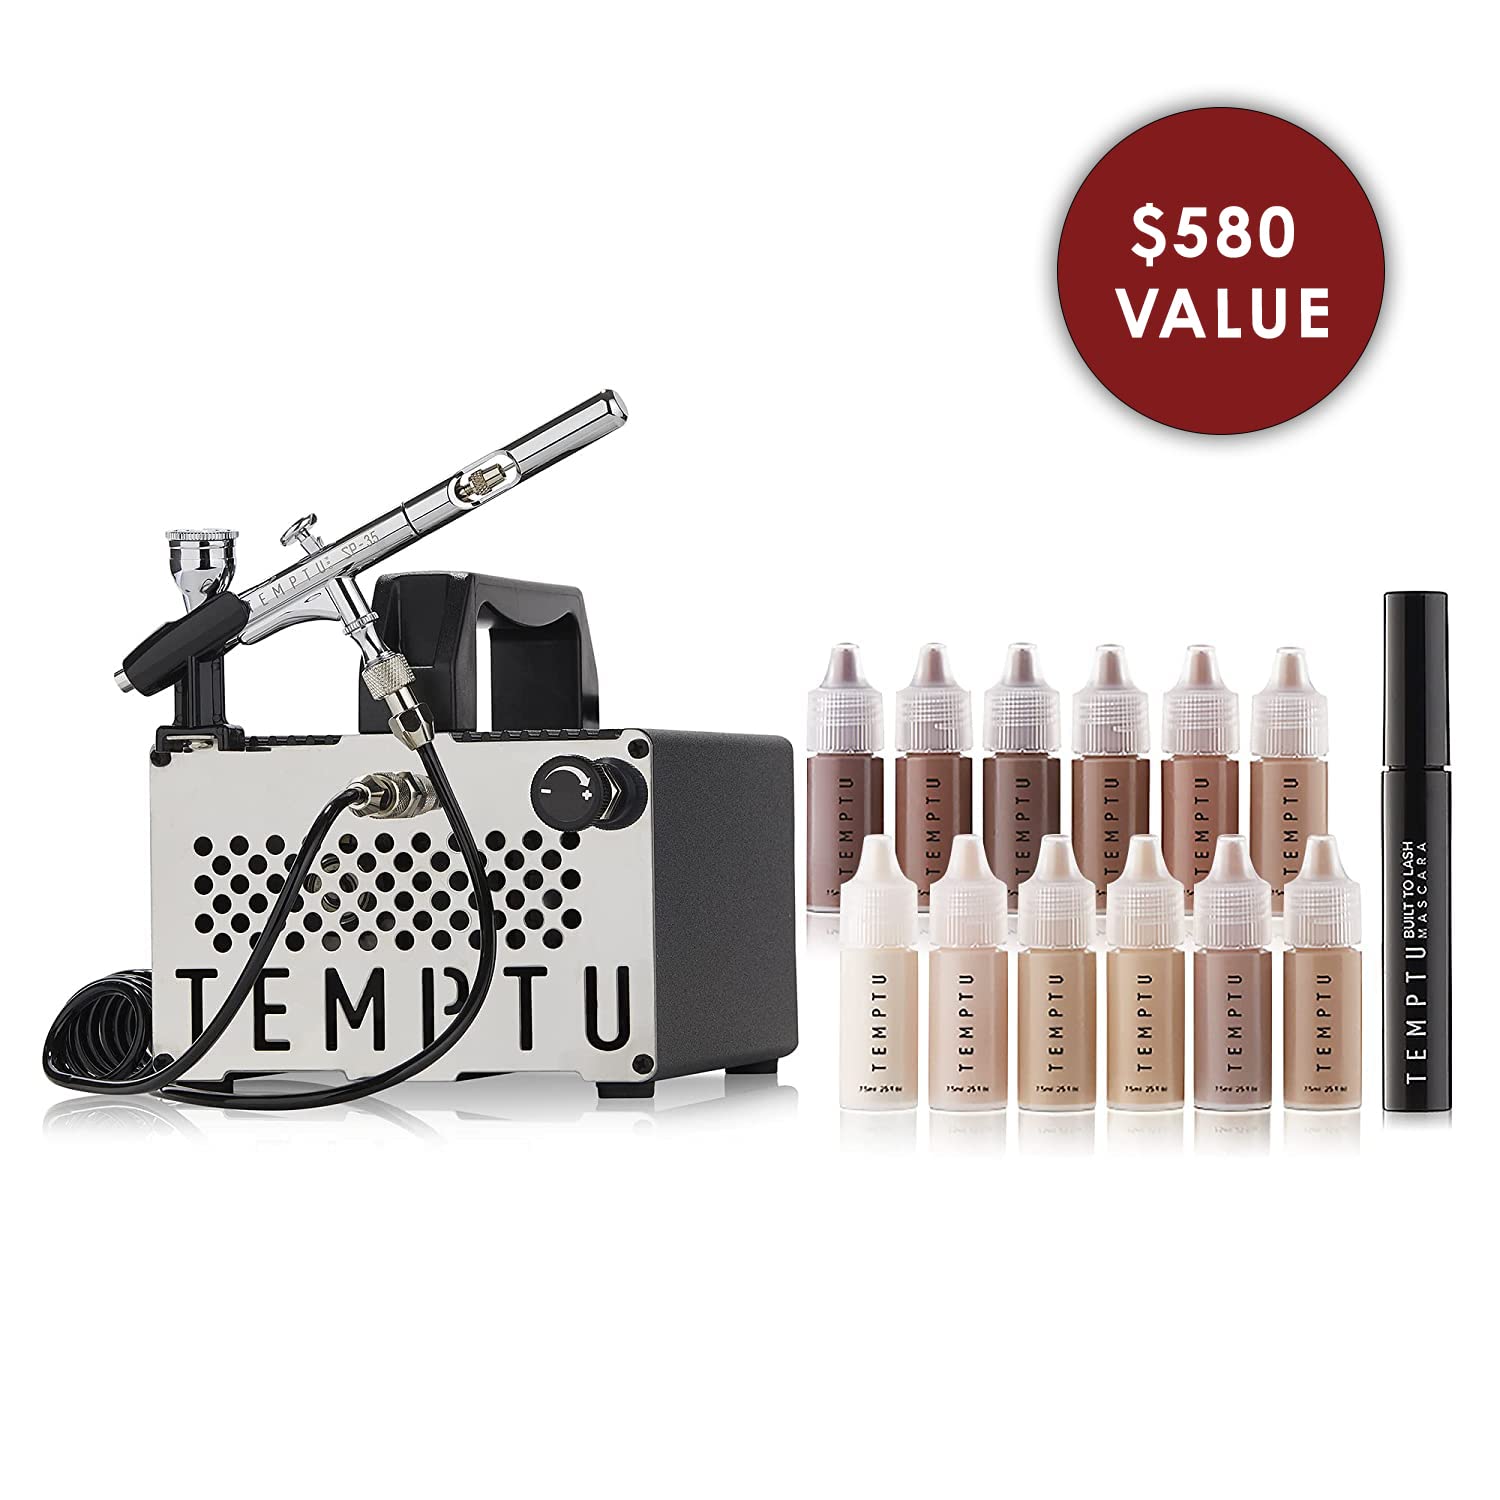 TEMPTU Airbrush Makeup System S-One Kit: Airbrush Makeup Set for Professionals and Makeup Artists: Includes S/B Silicone-Based Foundation Starter Set & Cleaning Kit, Lightweight, Travel-Friendly